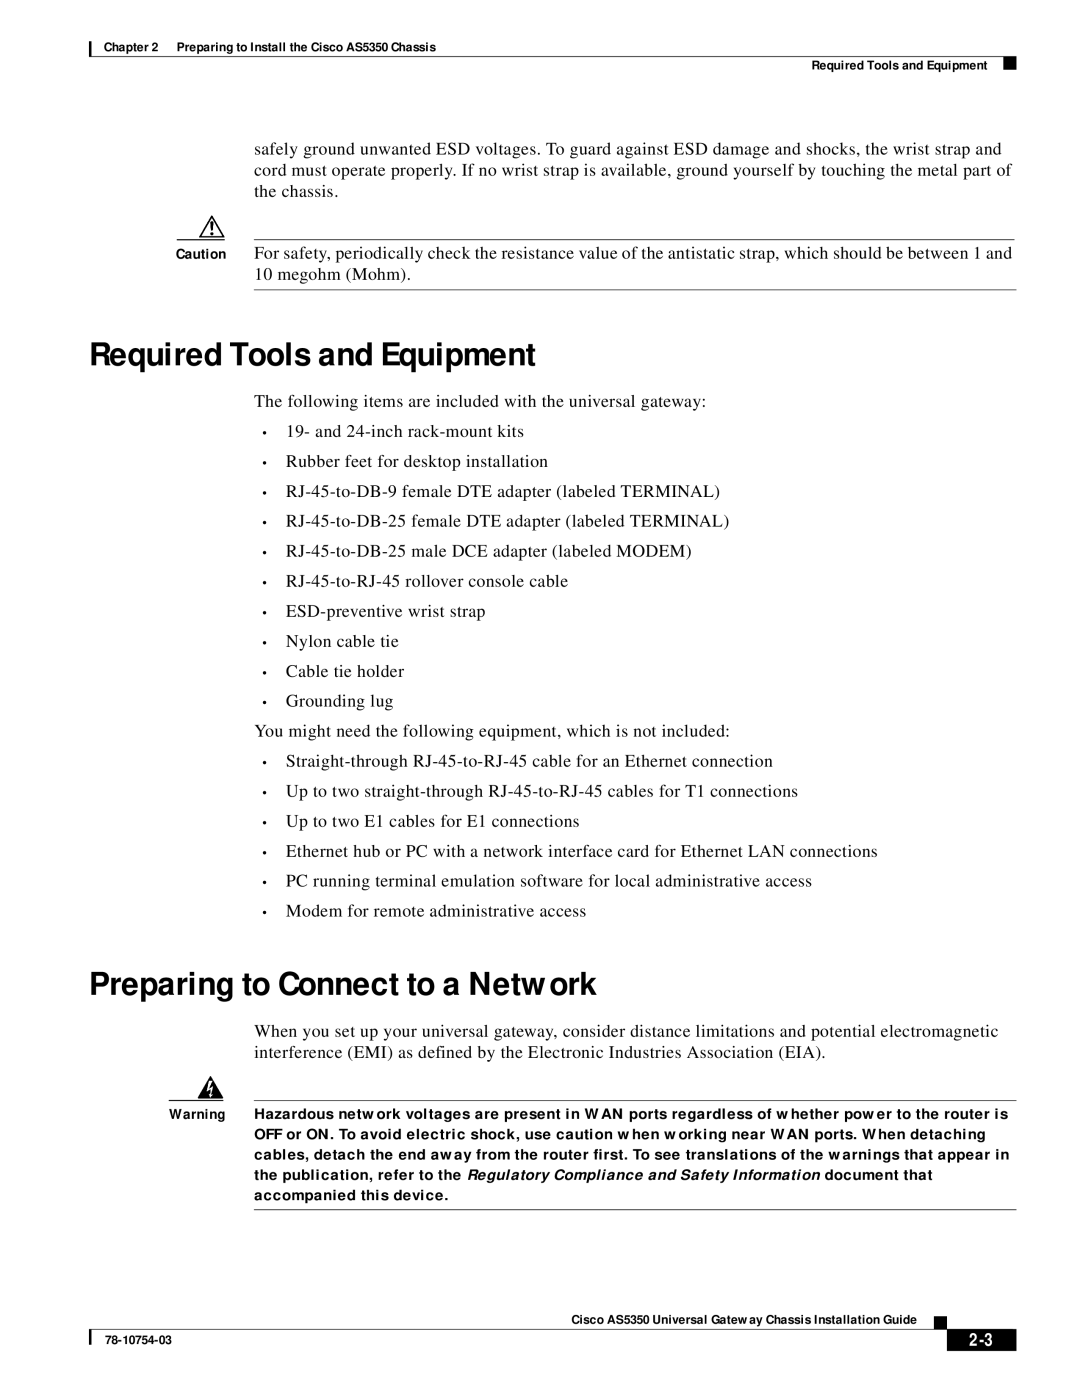 Cisco Systems AS5350 manual Required Tools and Equipment, Preparing to Connect to a Network 